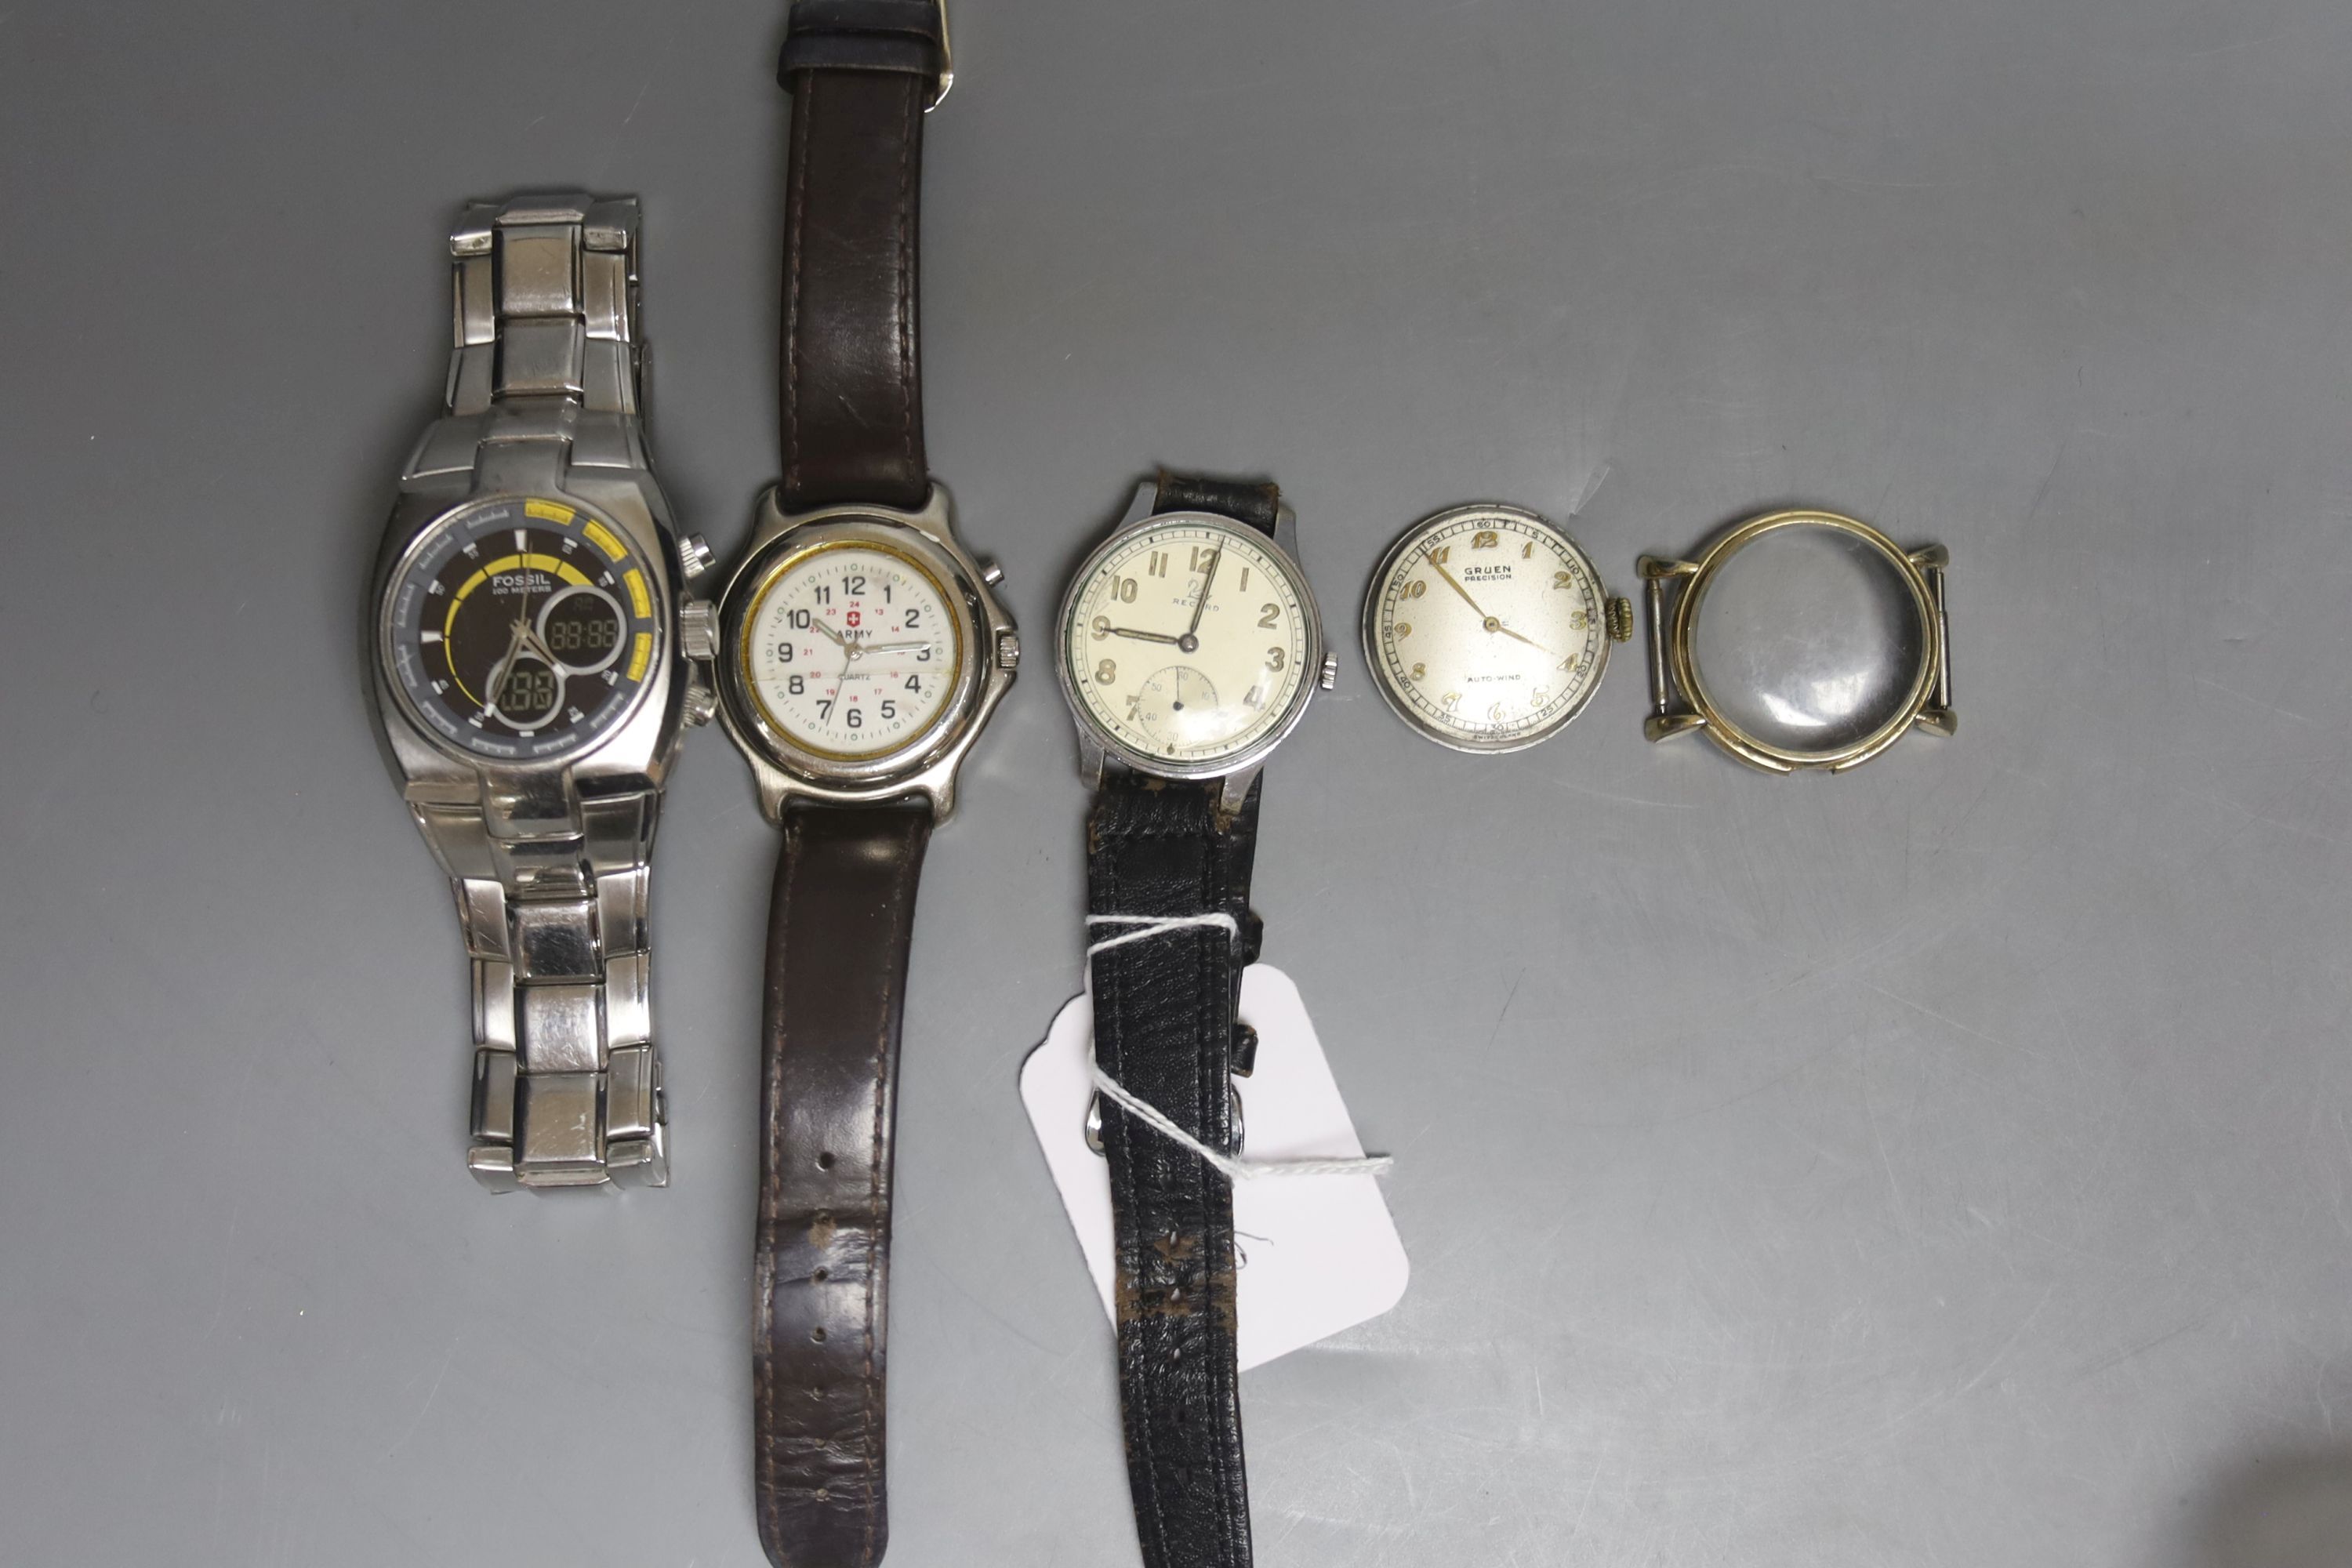 Four gent's wrist watches.